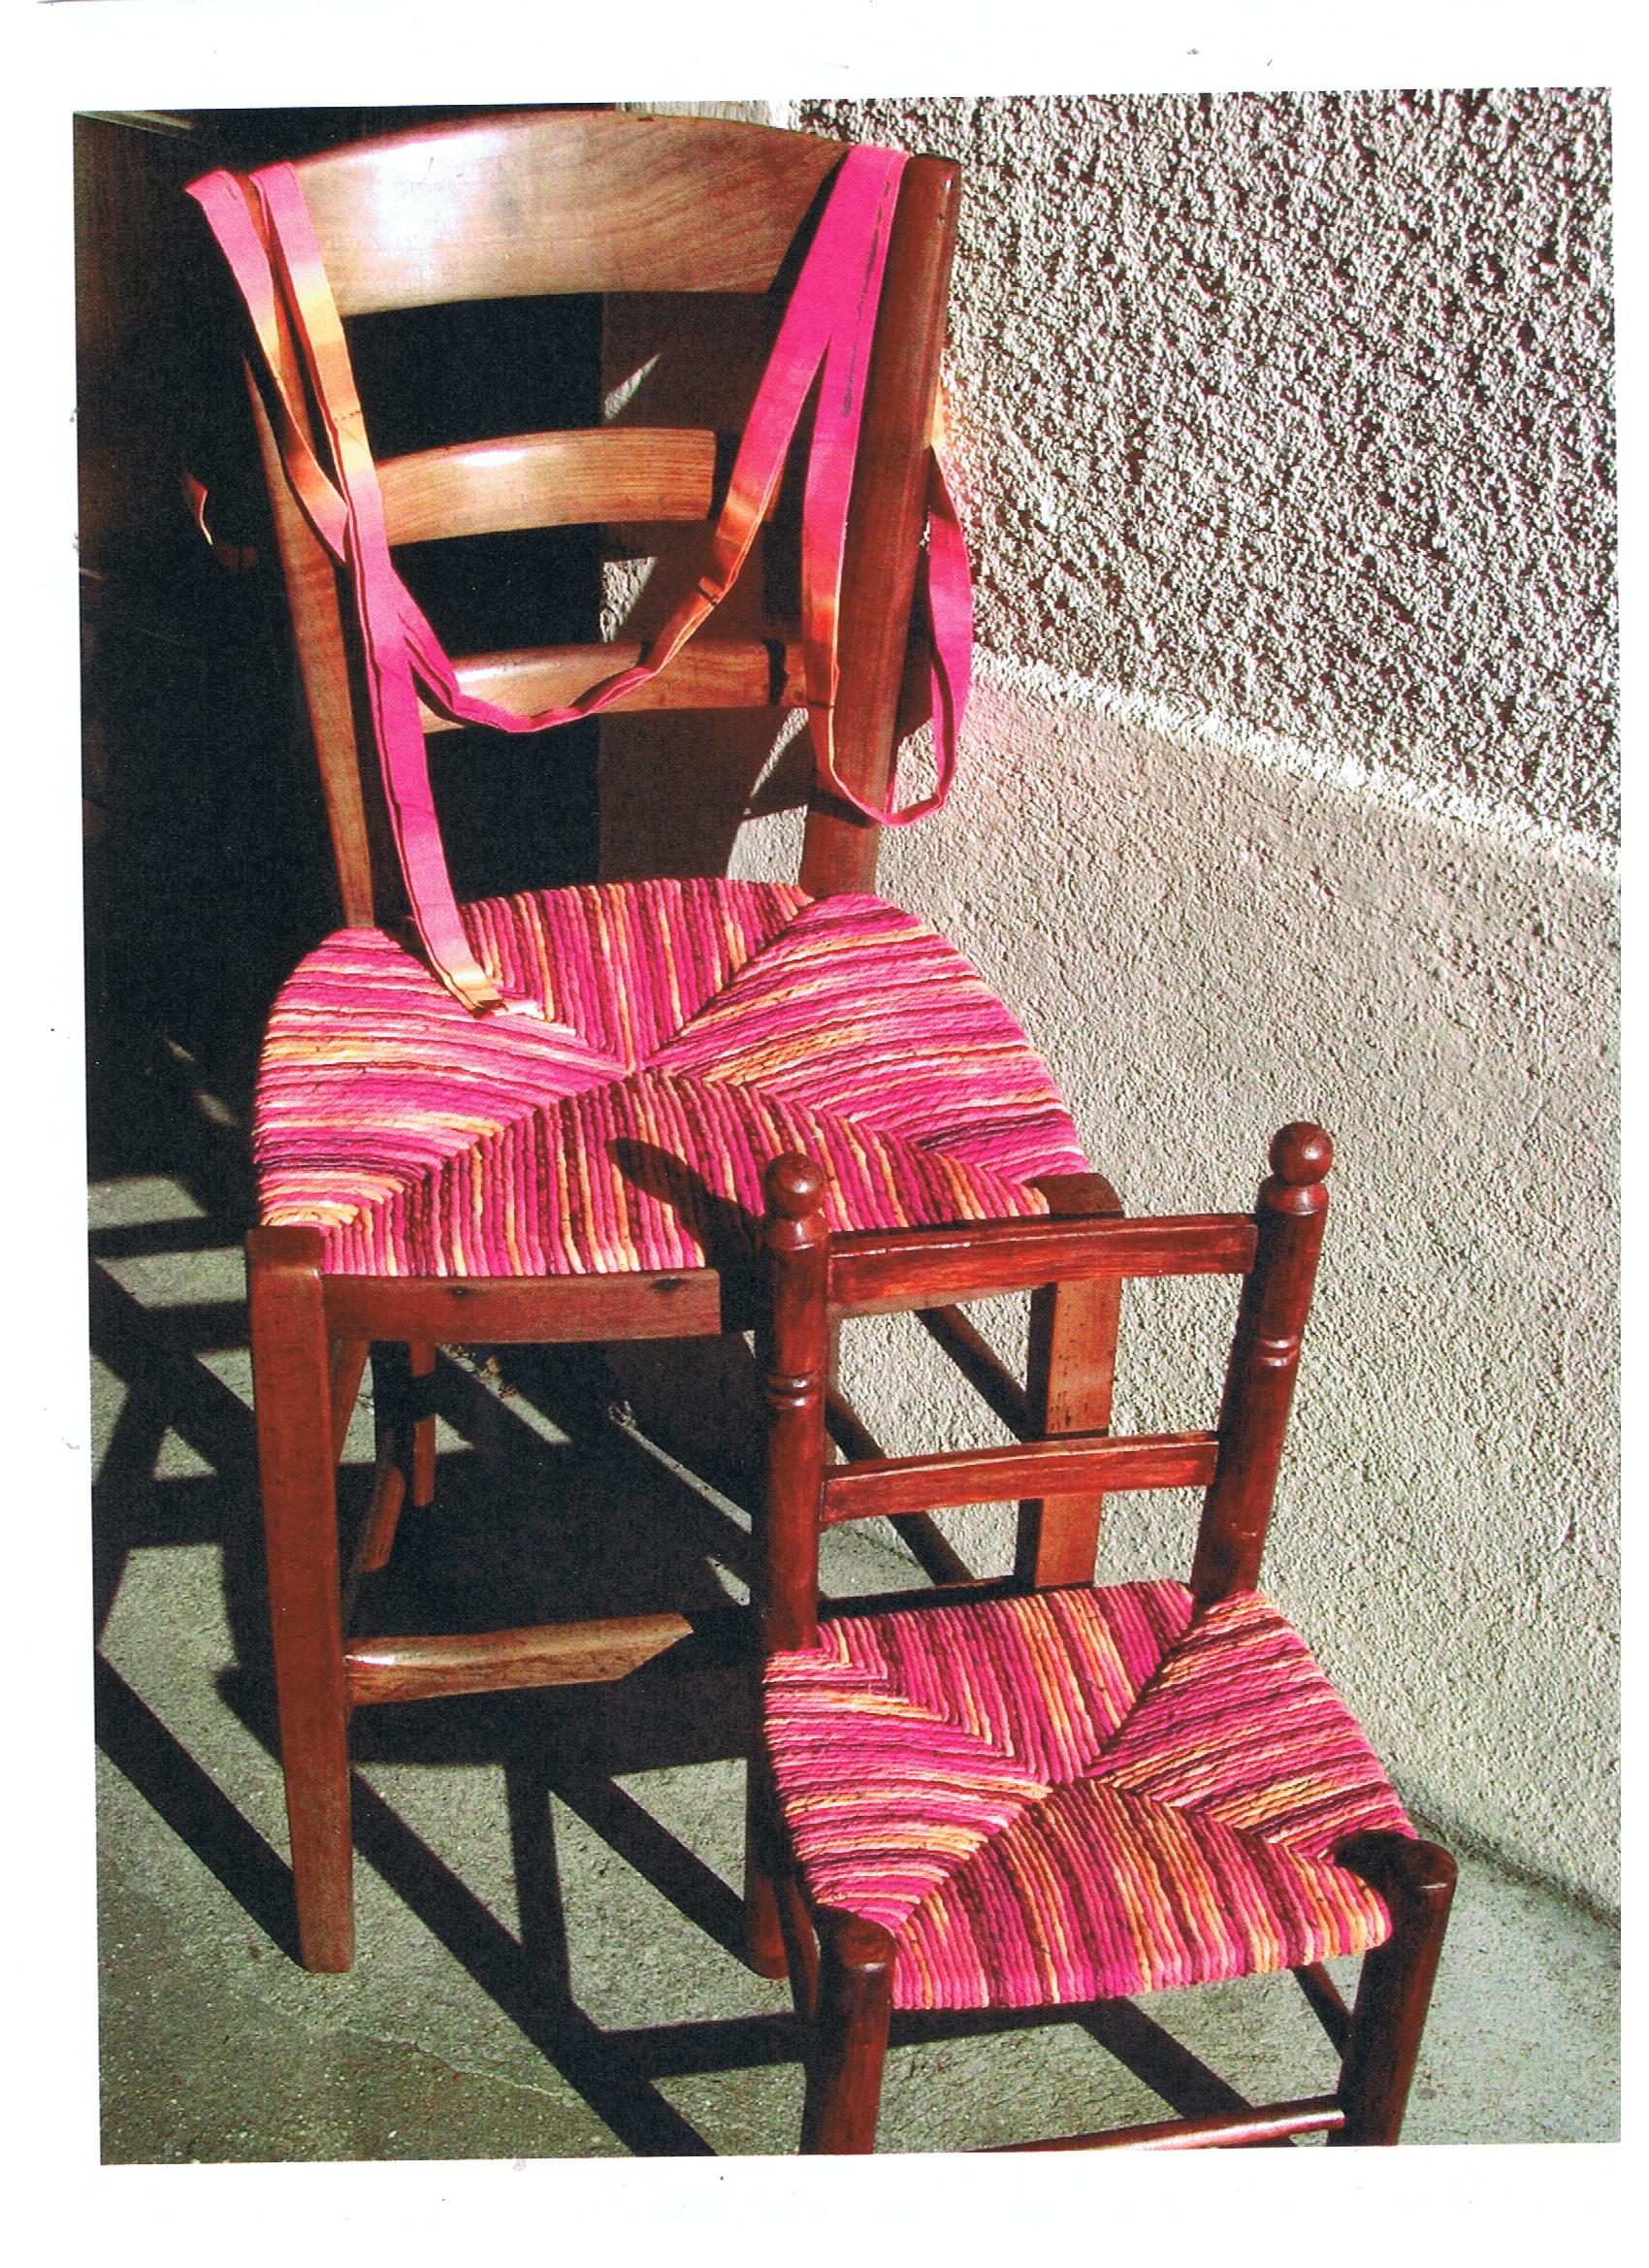 1000+ images about CANNAGE REMPAILLAGE on Pinterest  Woven chair, Wood